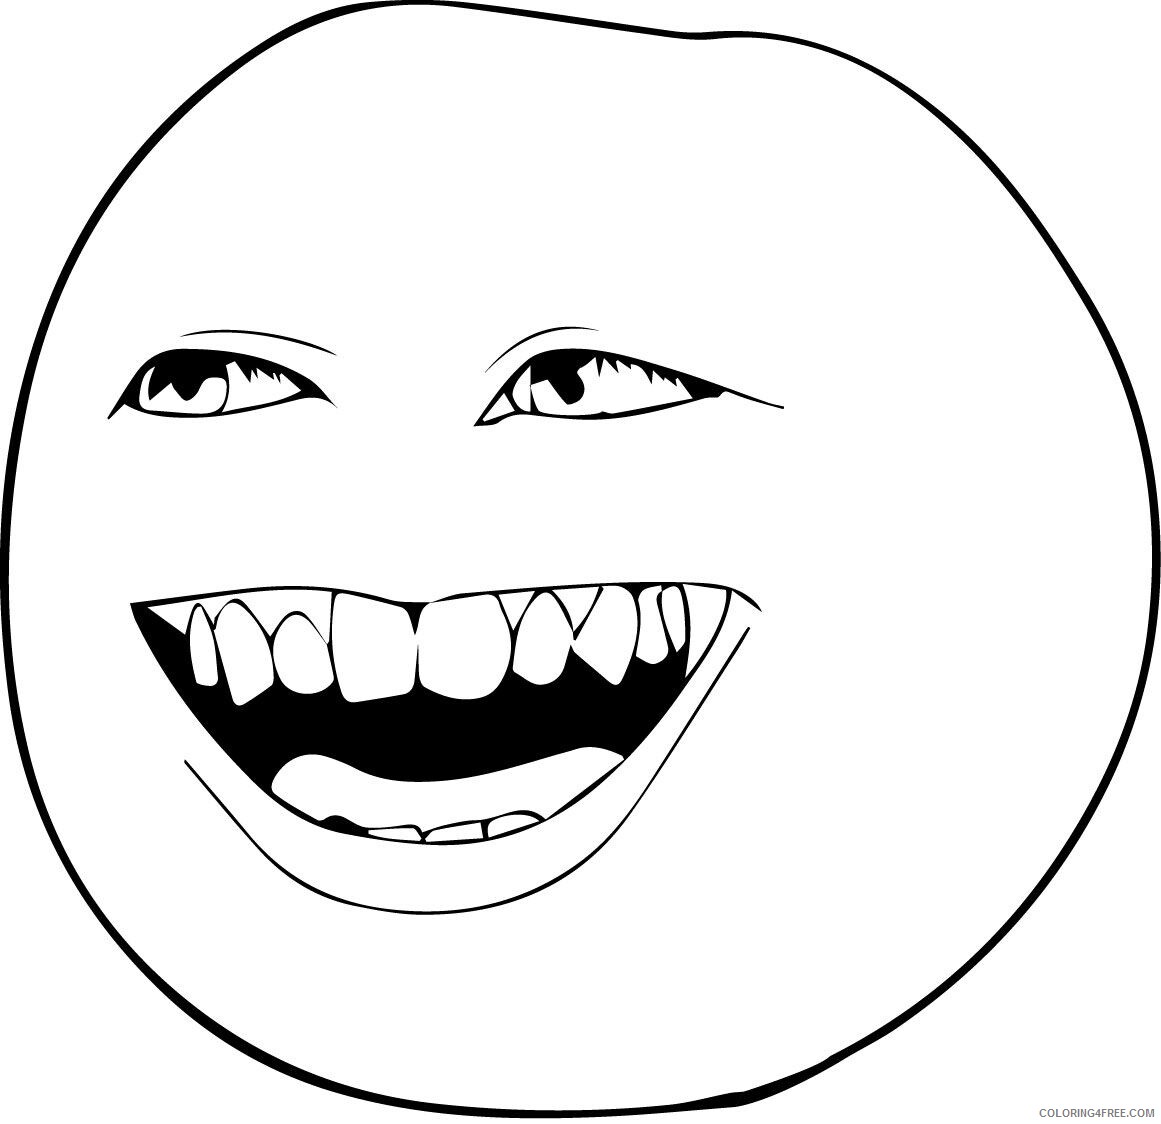 Annoying Orange Coloring Pages Printable Sheets annoying orange 5 jpg 2021 a 1534 Coloring4free